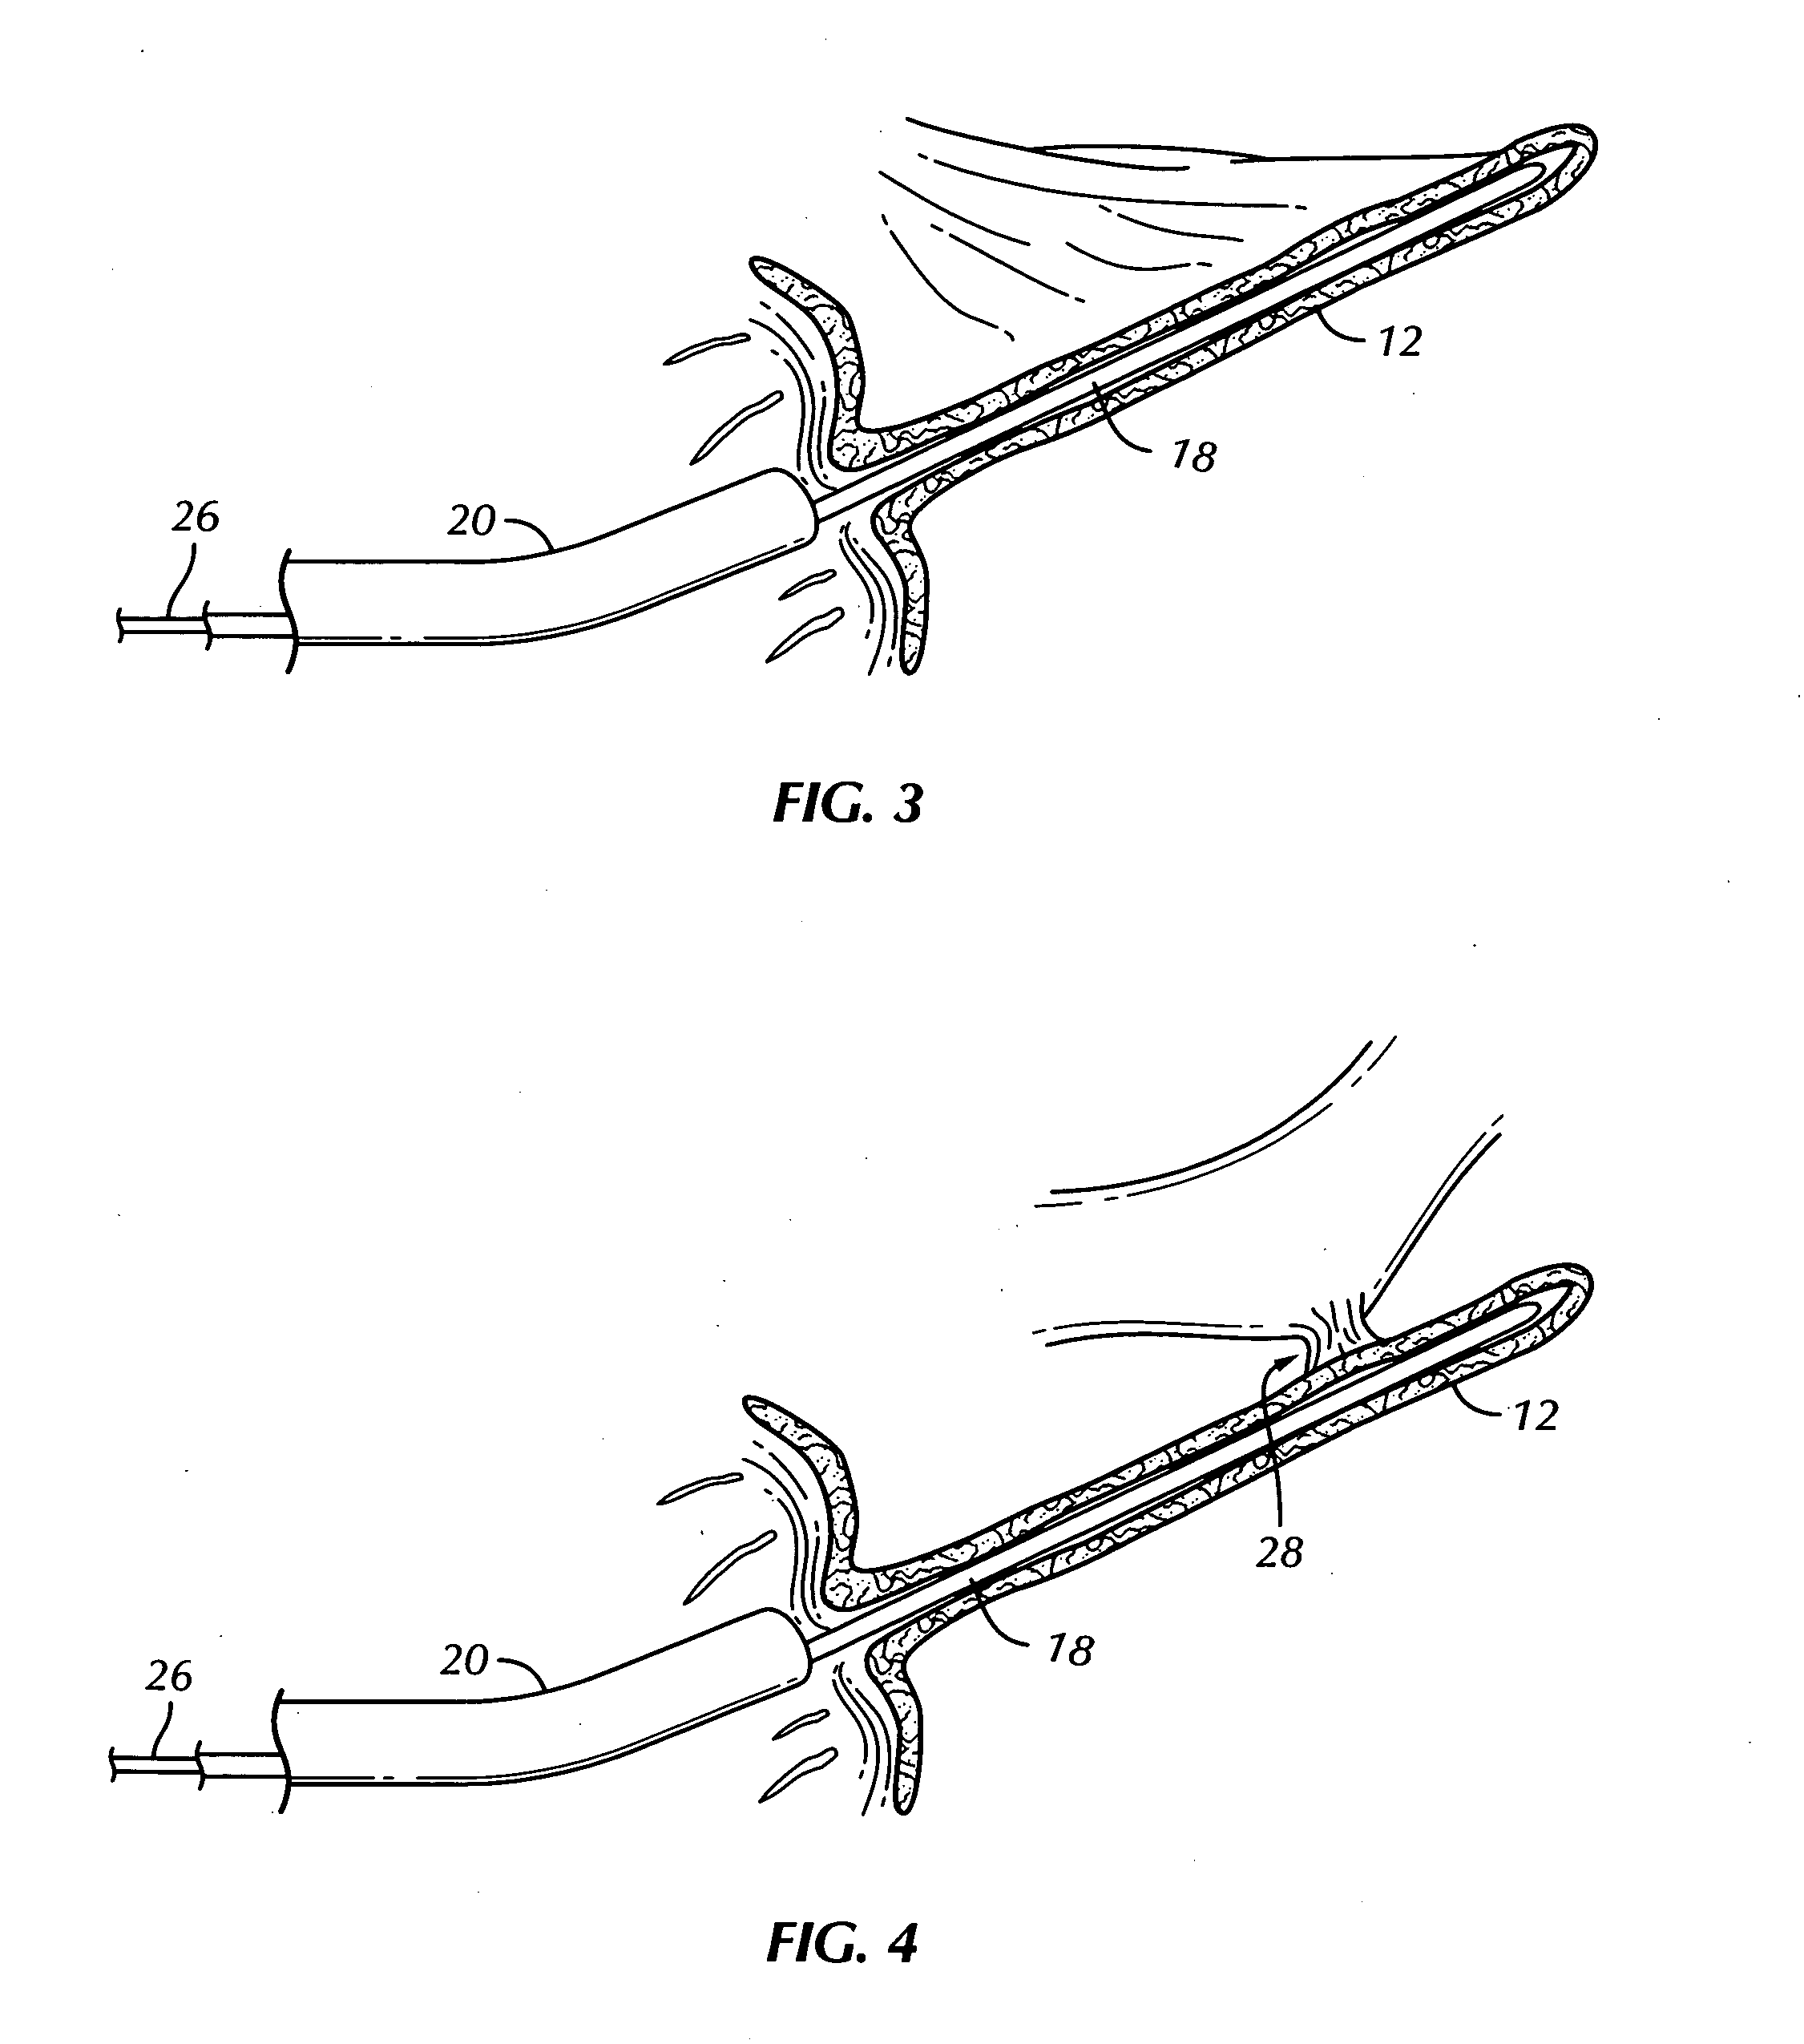 Systems and methods for less invasive resolution of maladies of tissue including the appendix, gall bladder, and hemorrhoids